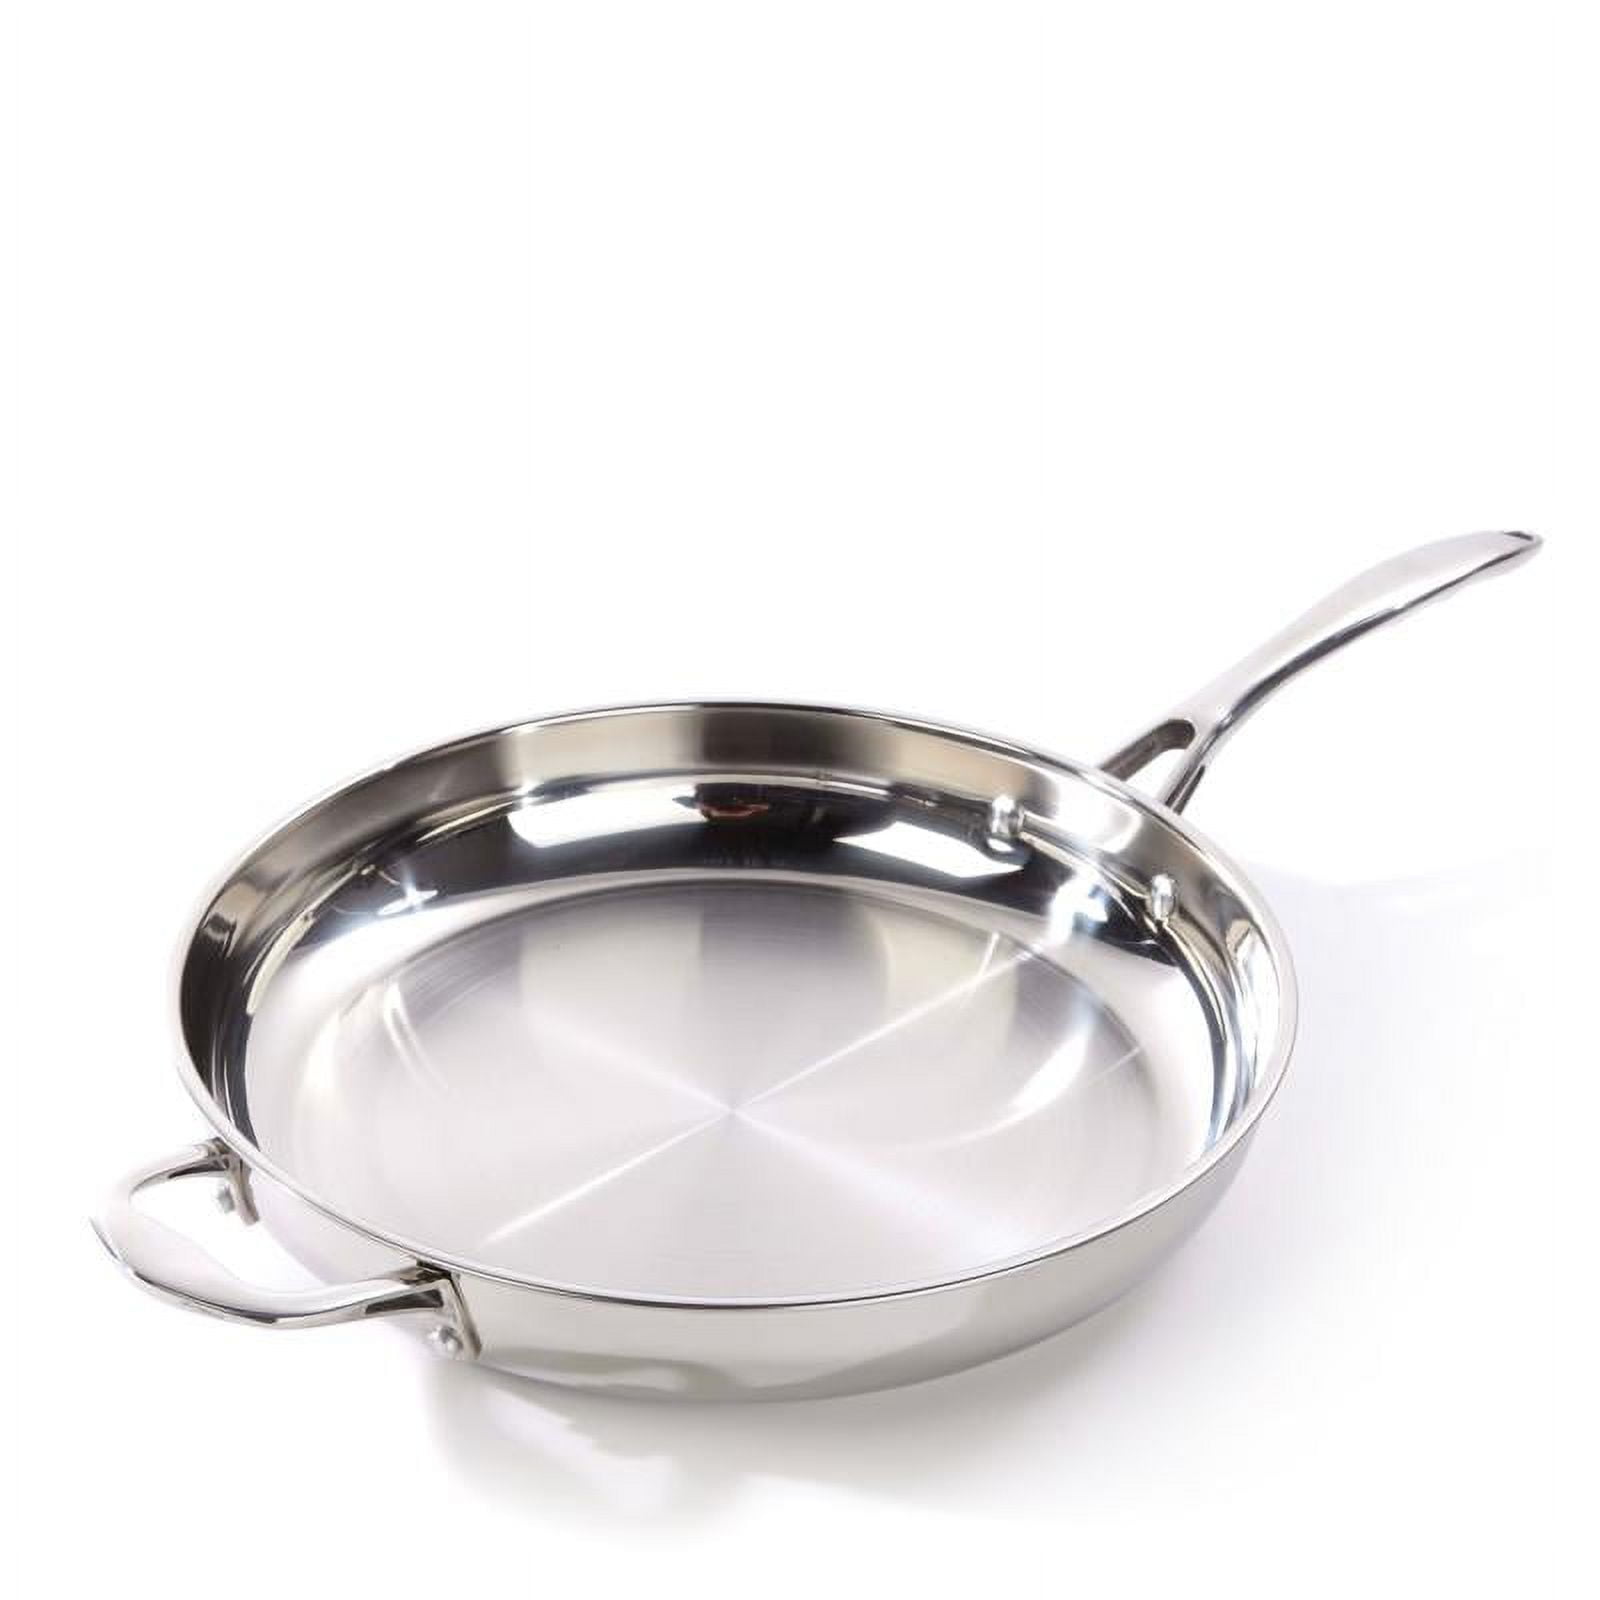 Wolfgang Puck 10 Inch Stainless Steel Skillet With Lid